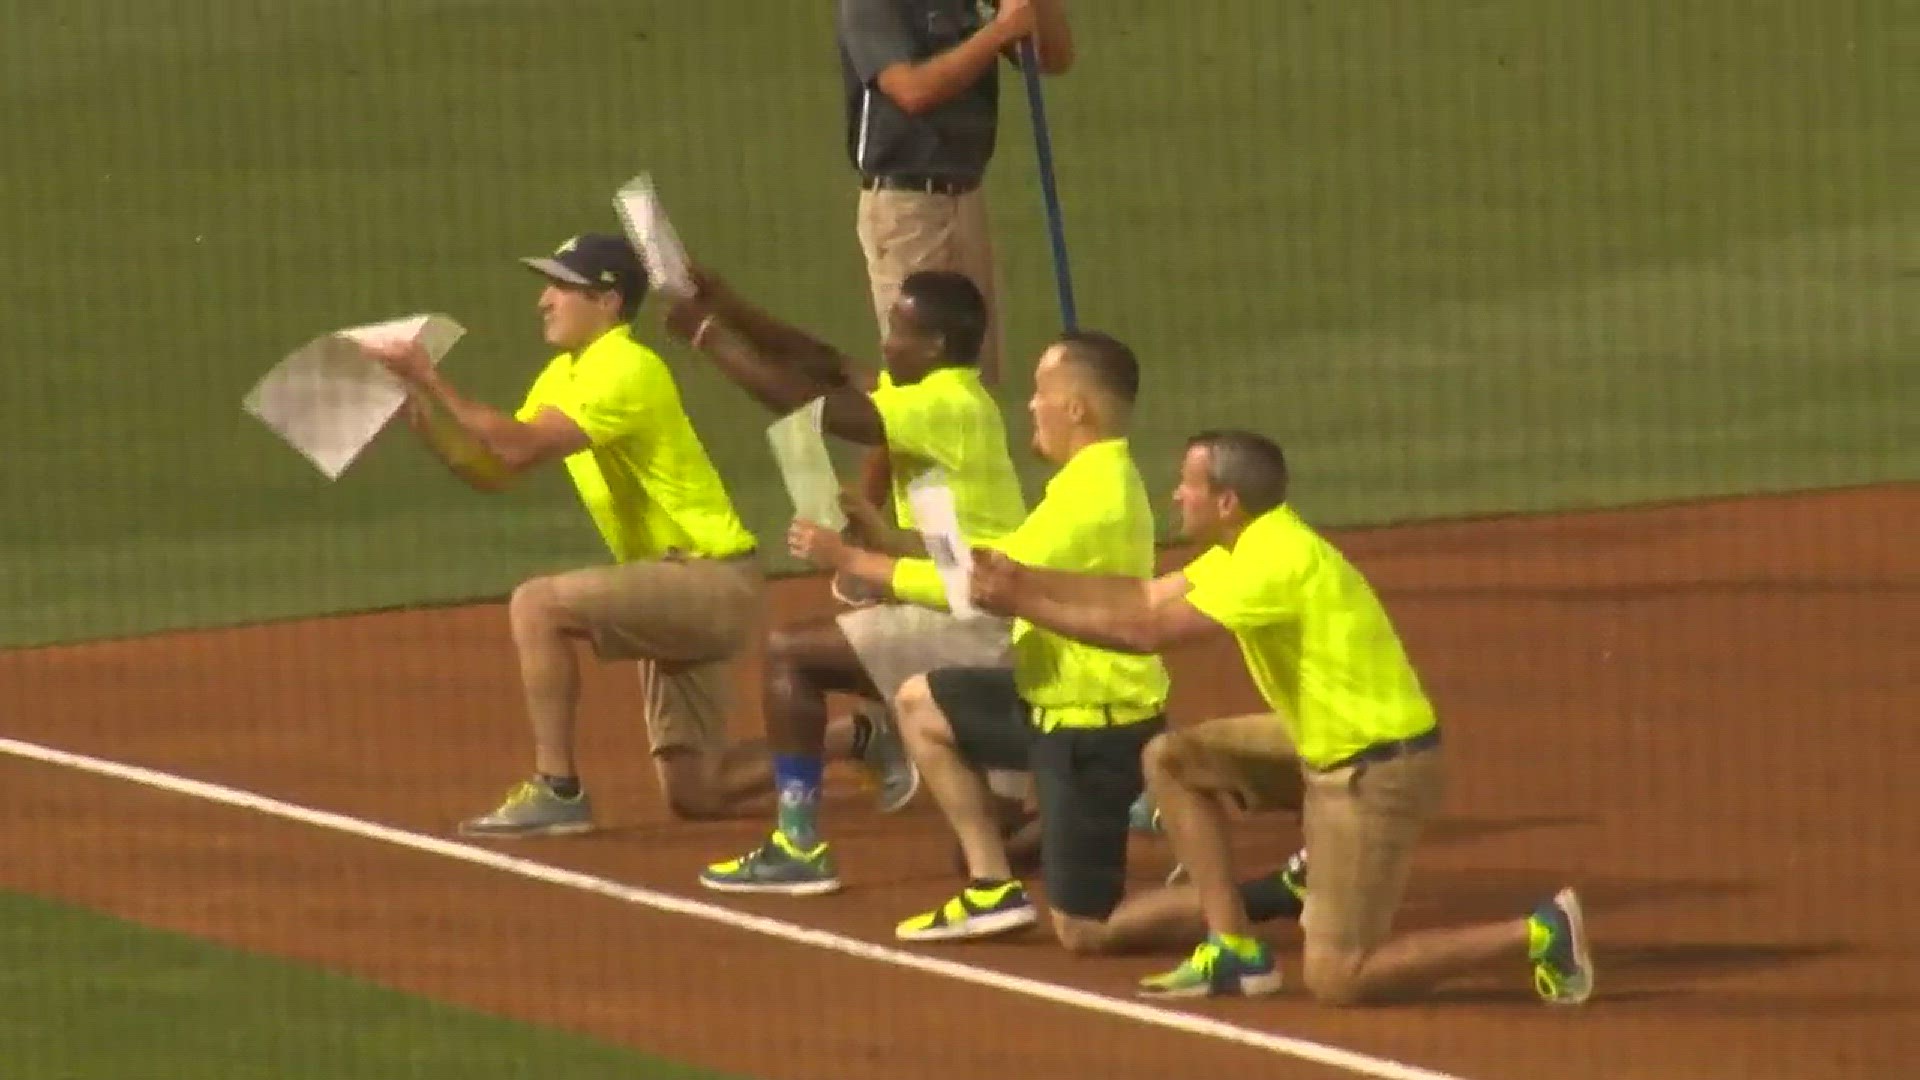 People thought a failed proposal at the Columbia Fireflies game was real. But the couple is actually already married.